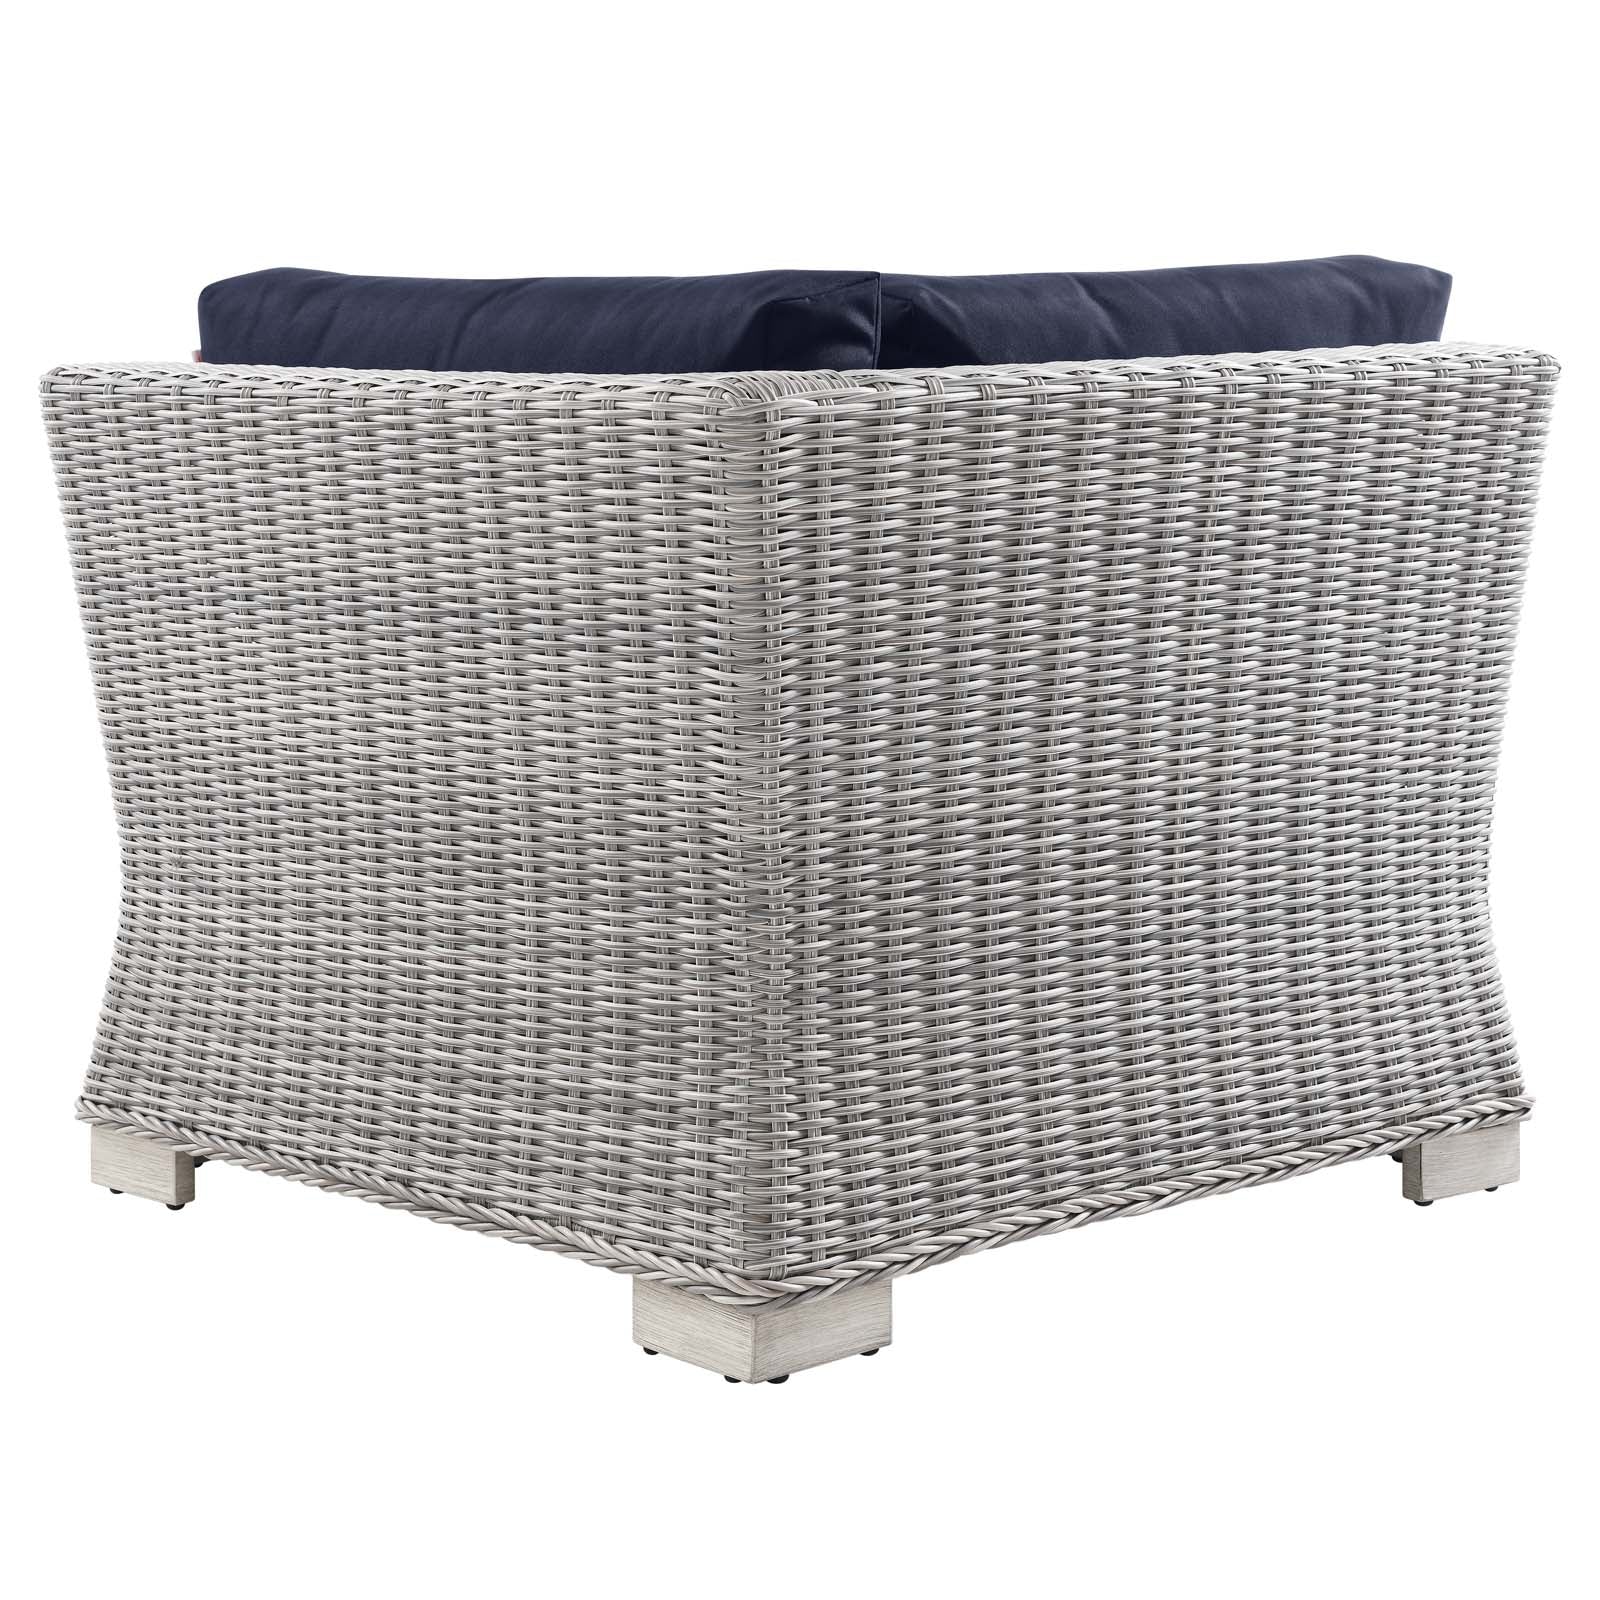 Modway Outdoor Chairs - Conway Outdoor Patio Wicker Rattan Corner Chair Light Gray Navy